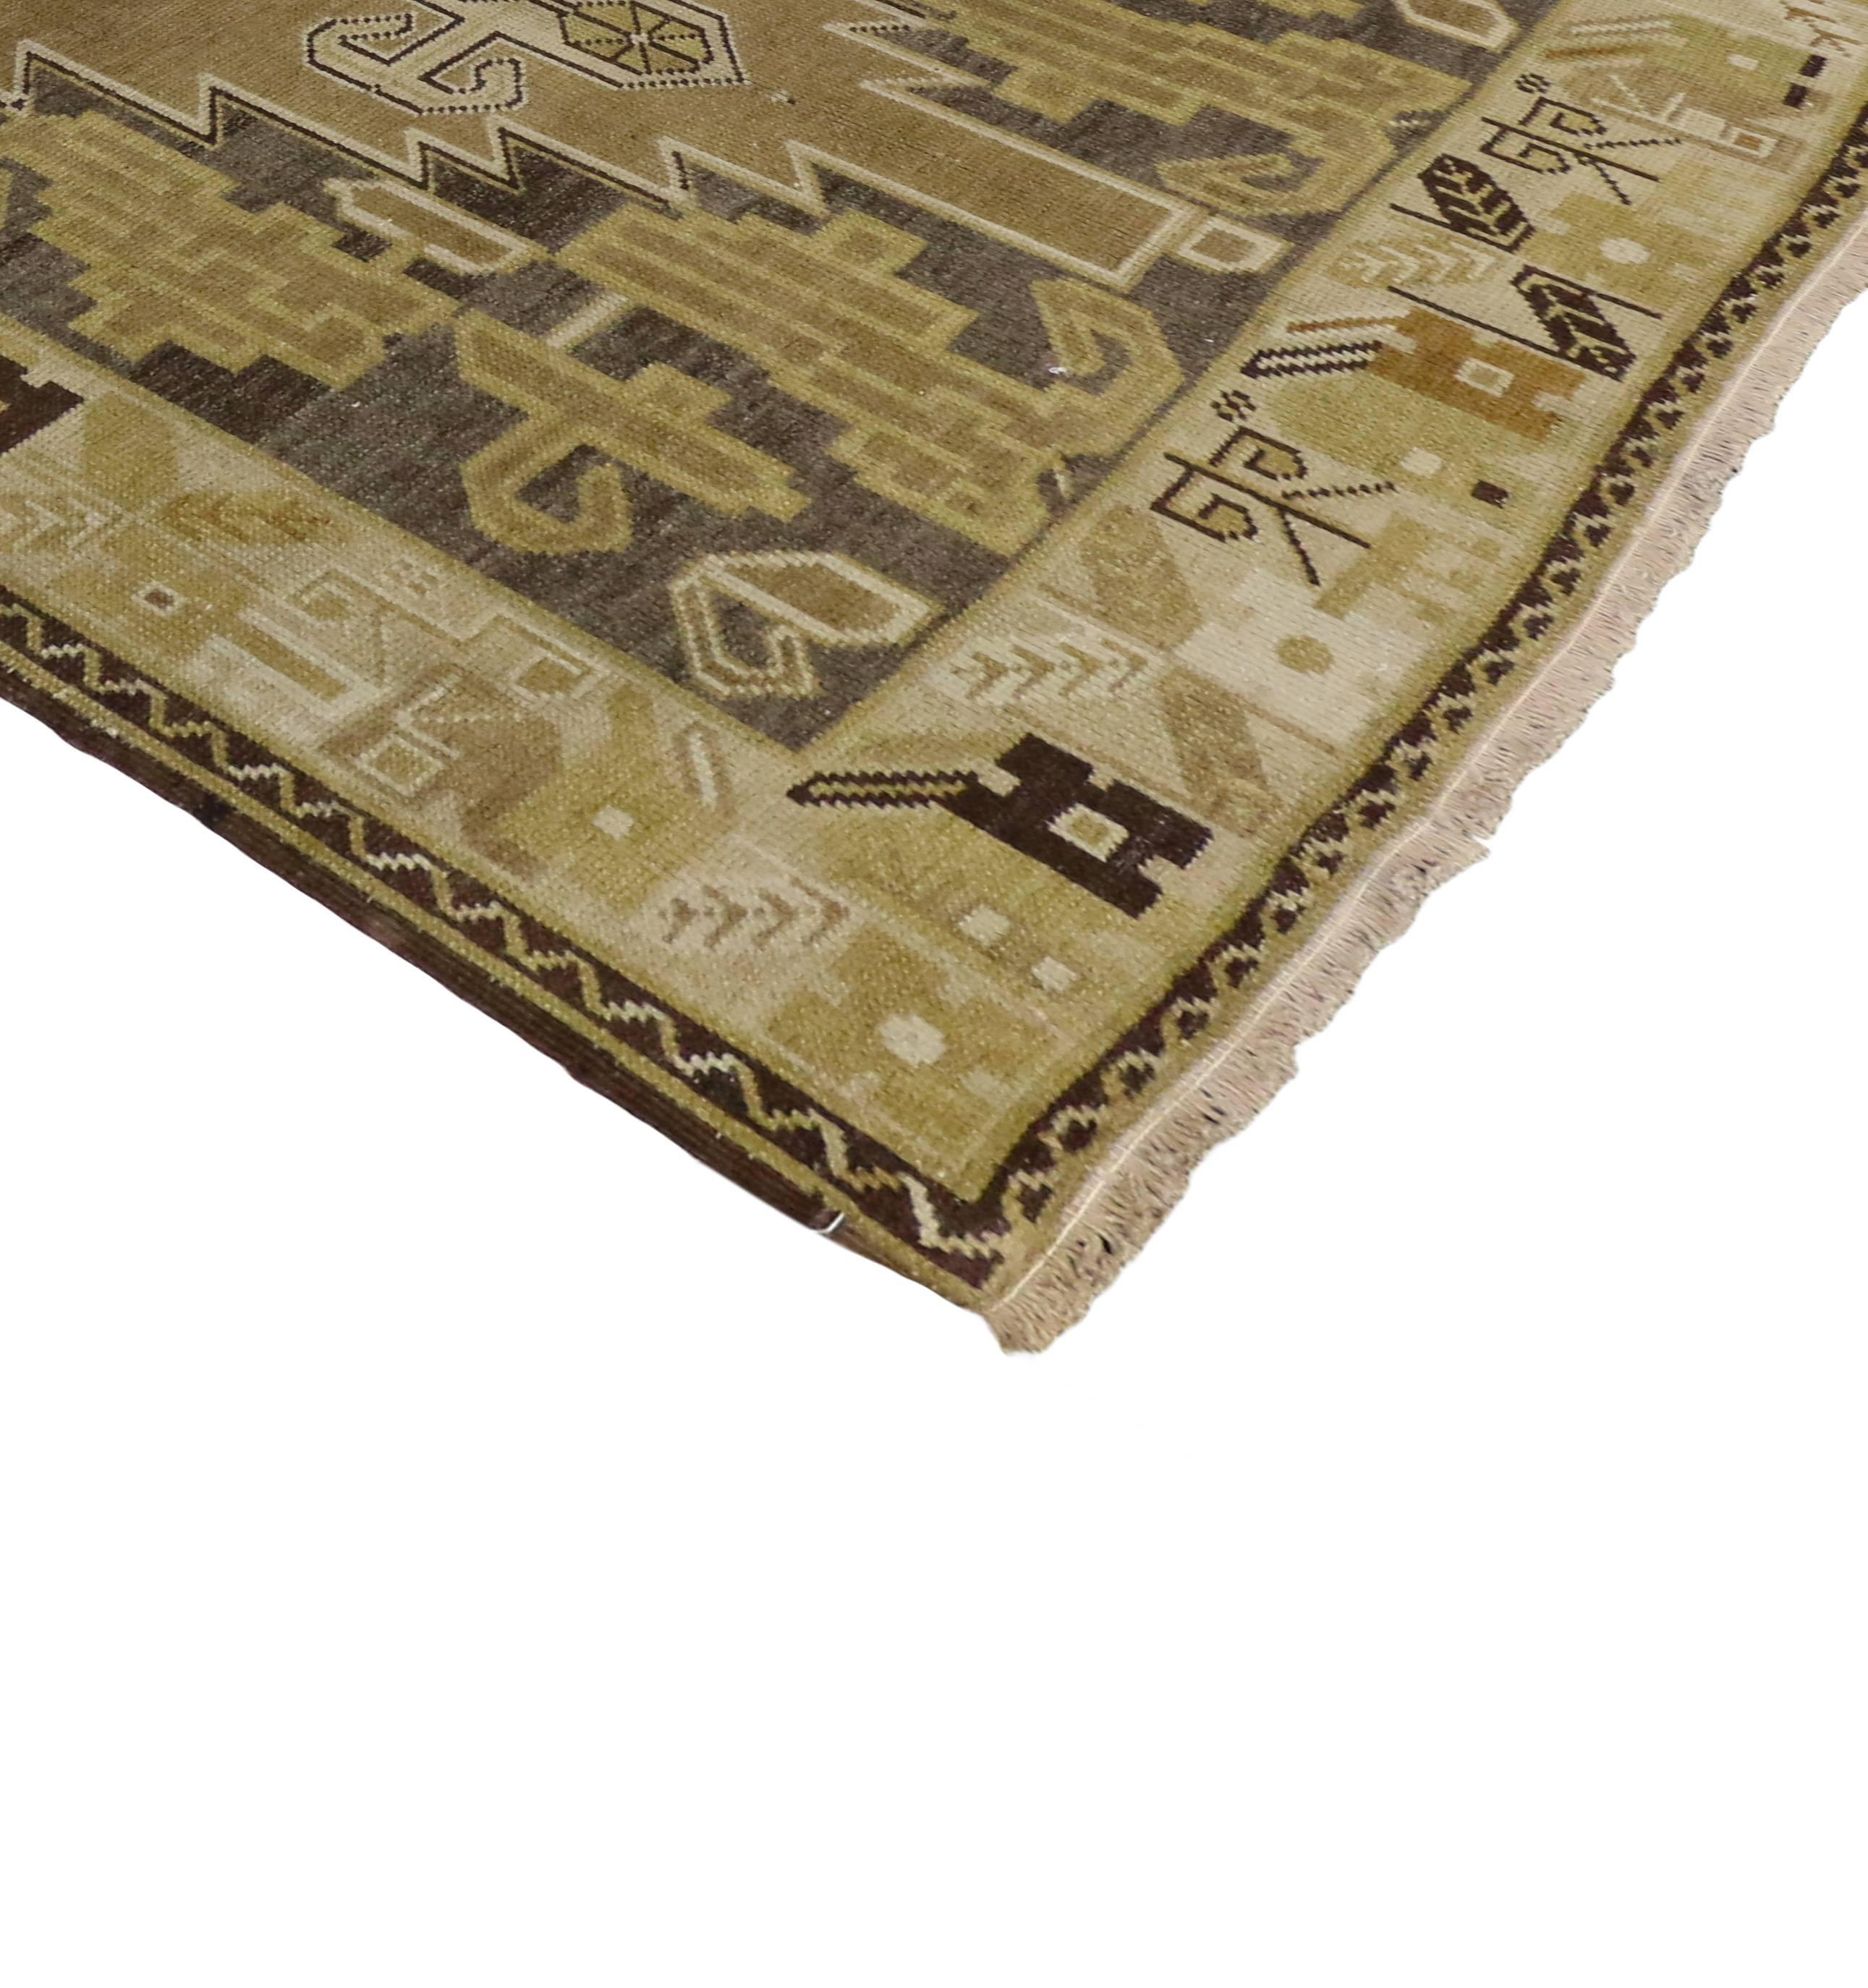 This vintage Turkish Oushak carpet runner with its Mid-Century Modern style bears a remarkable air of chic sophistication. Beautifully displayed, two large center medallions feature modern tribal motifs in an open abrashed of warm earth-tone colors.